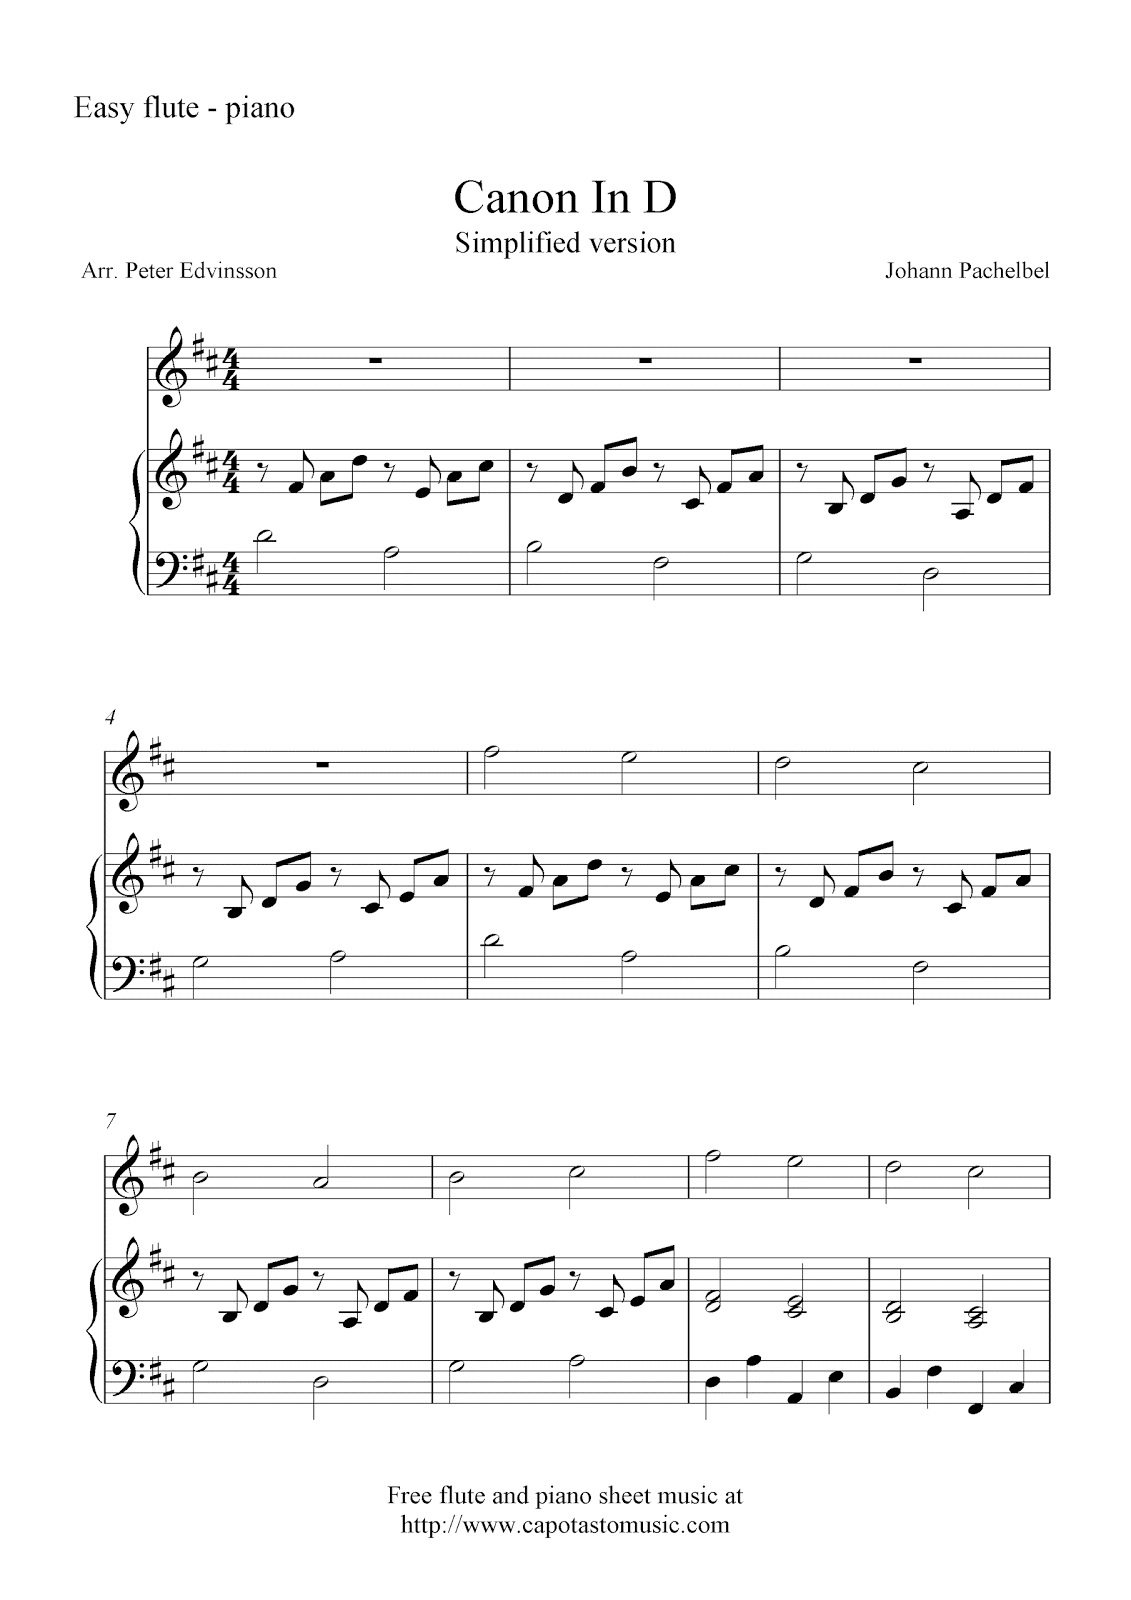 Free Printable Sheet Music Free Flute And Piano Sheet Music Canon In D